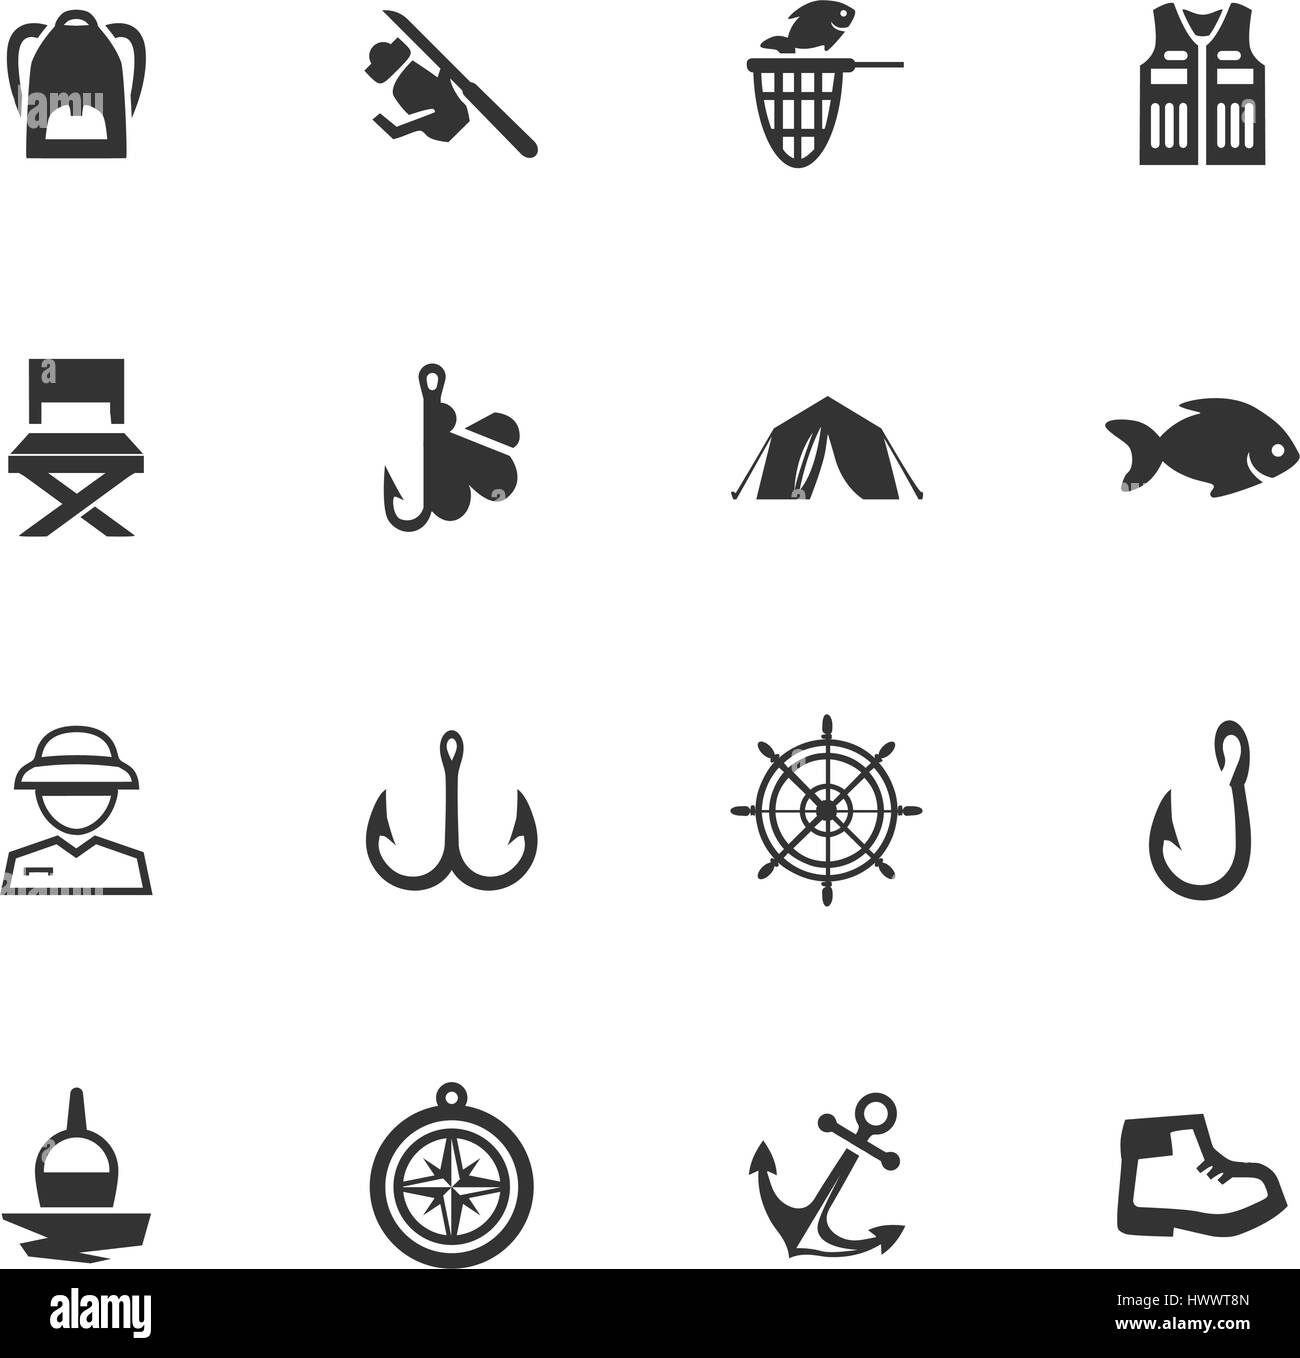 Fishing vector icons for user interface design Stock Vector